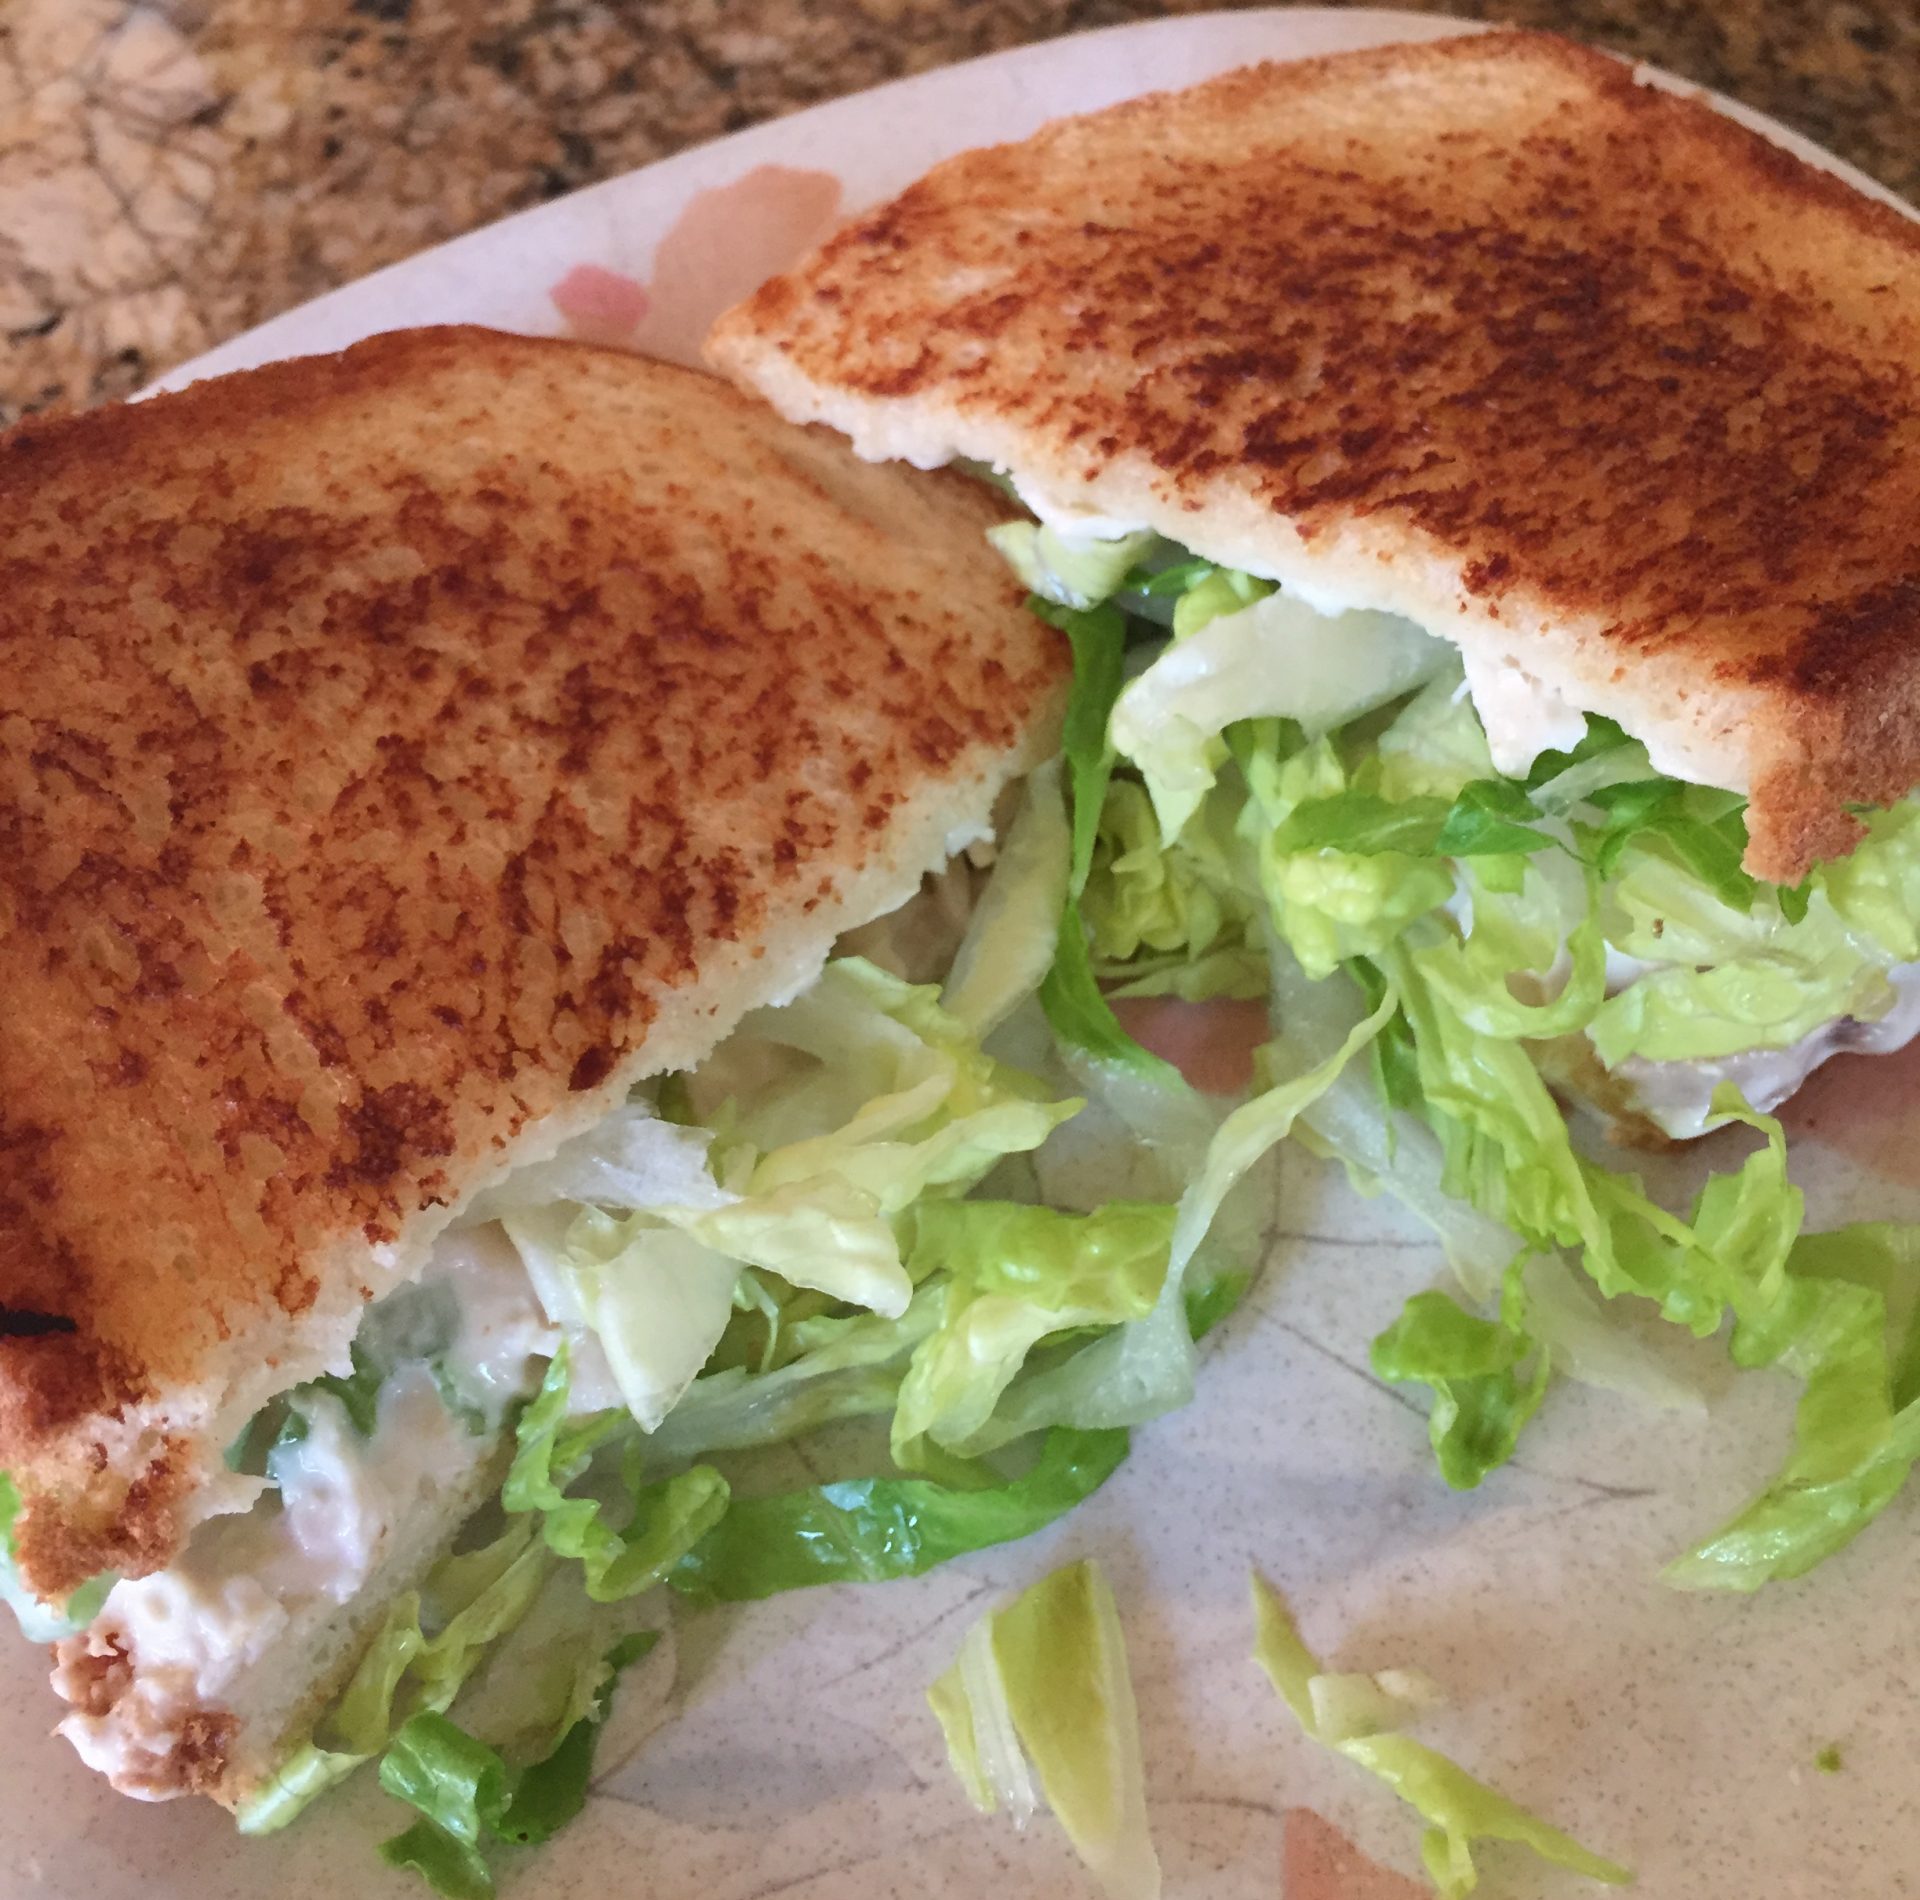 Grilled chicken salad sandwich with lettuce